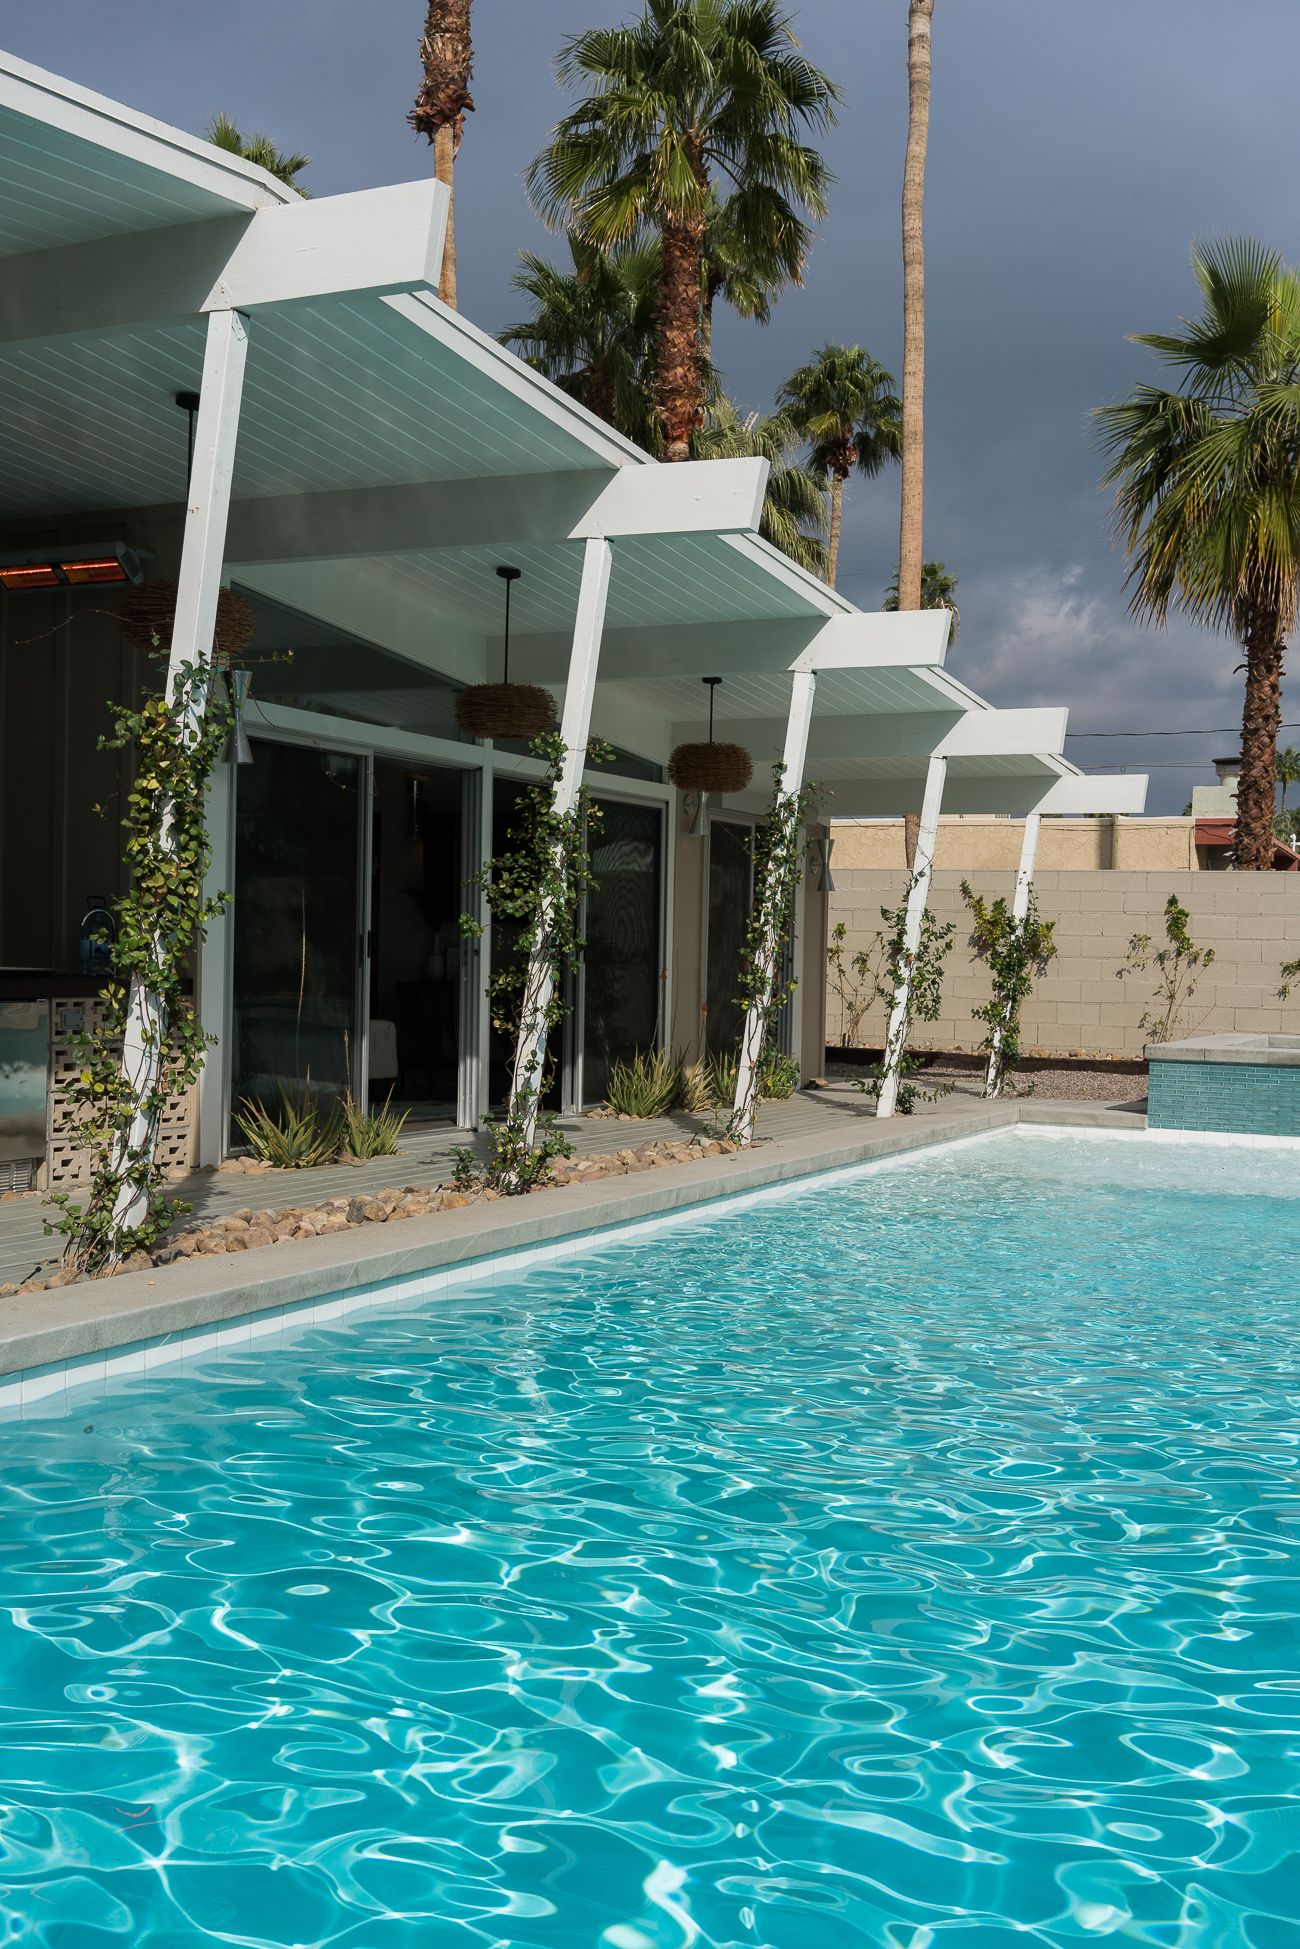 West Elm House - Modernism Week / See and Savour